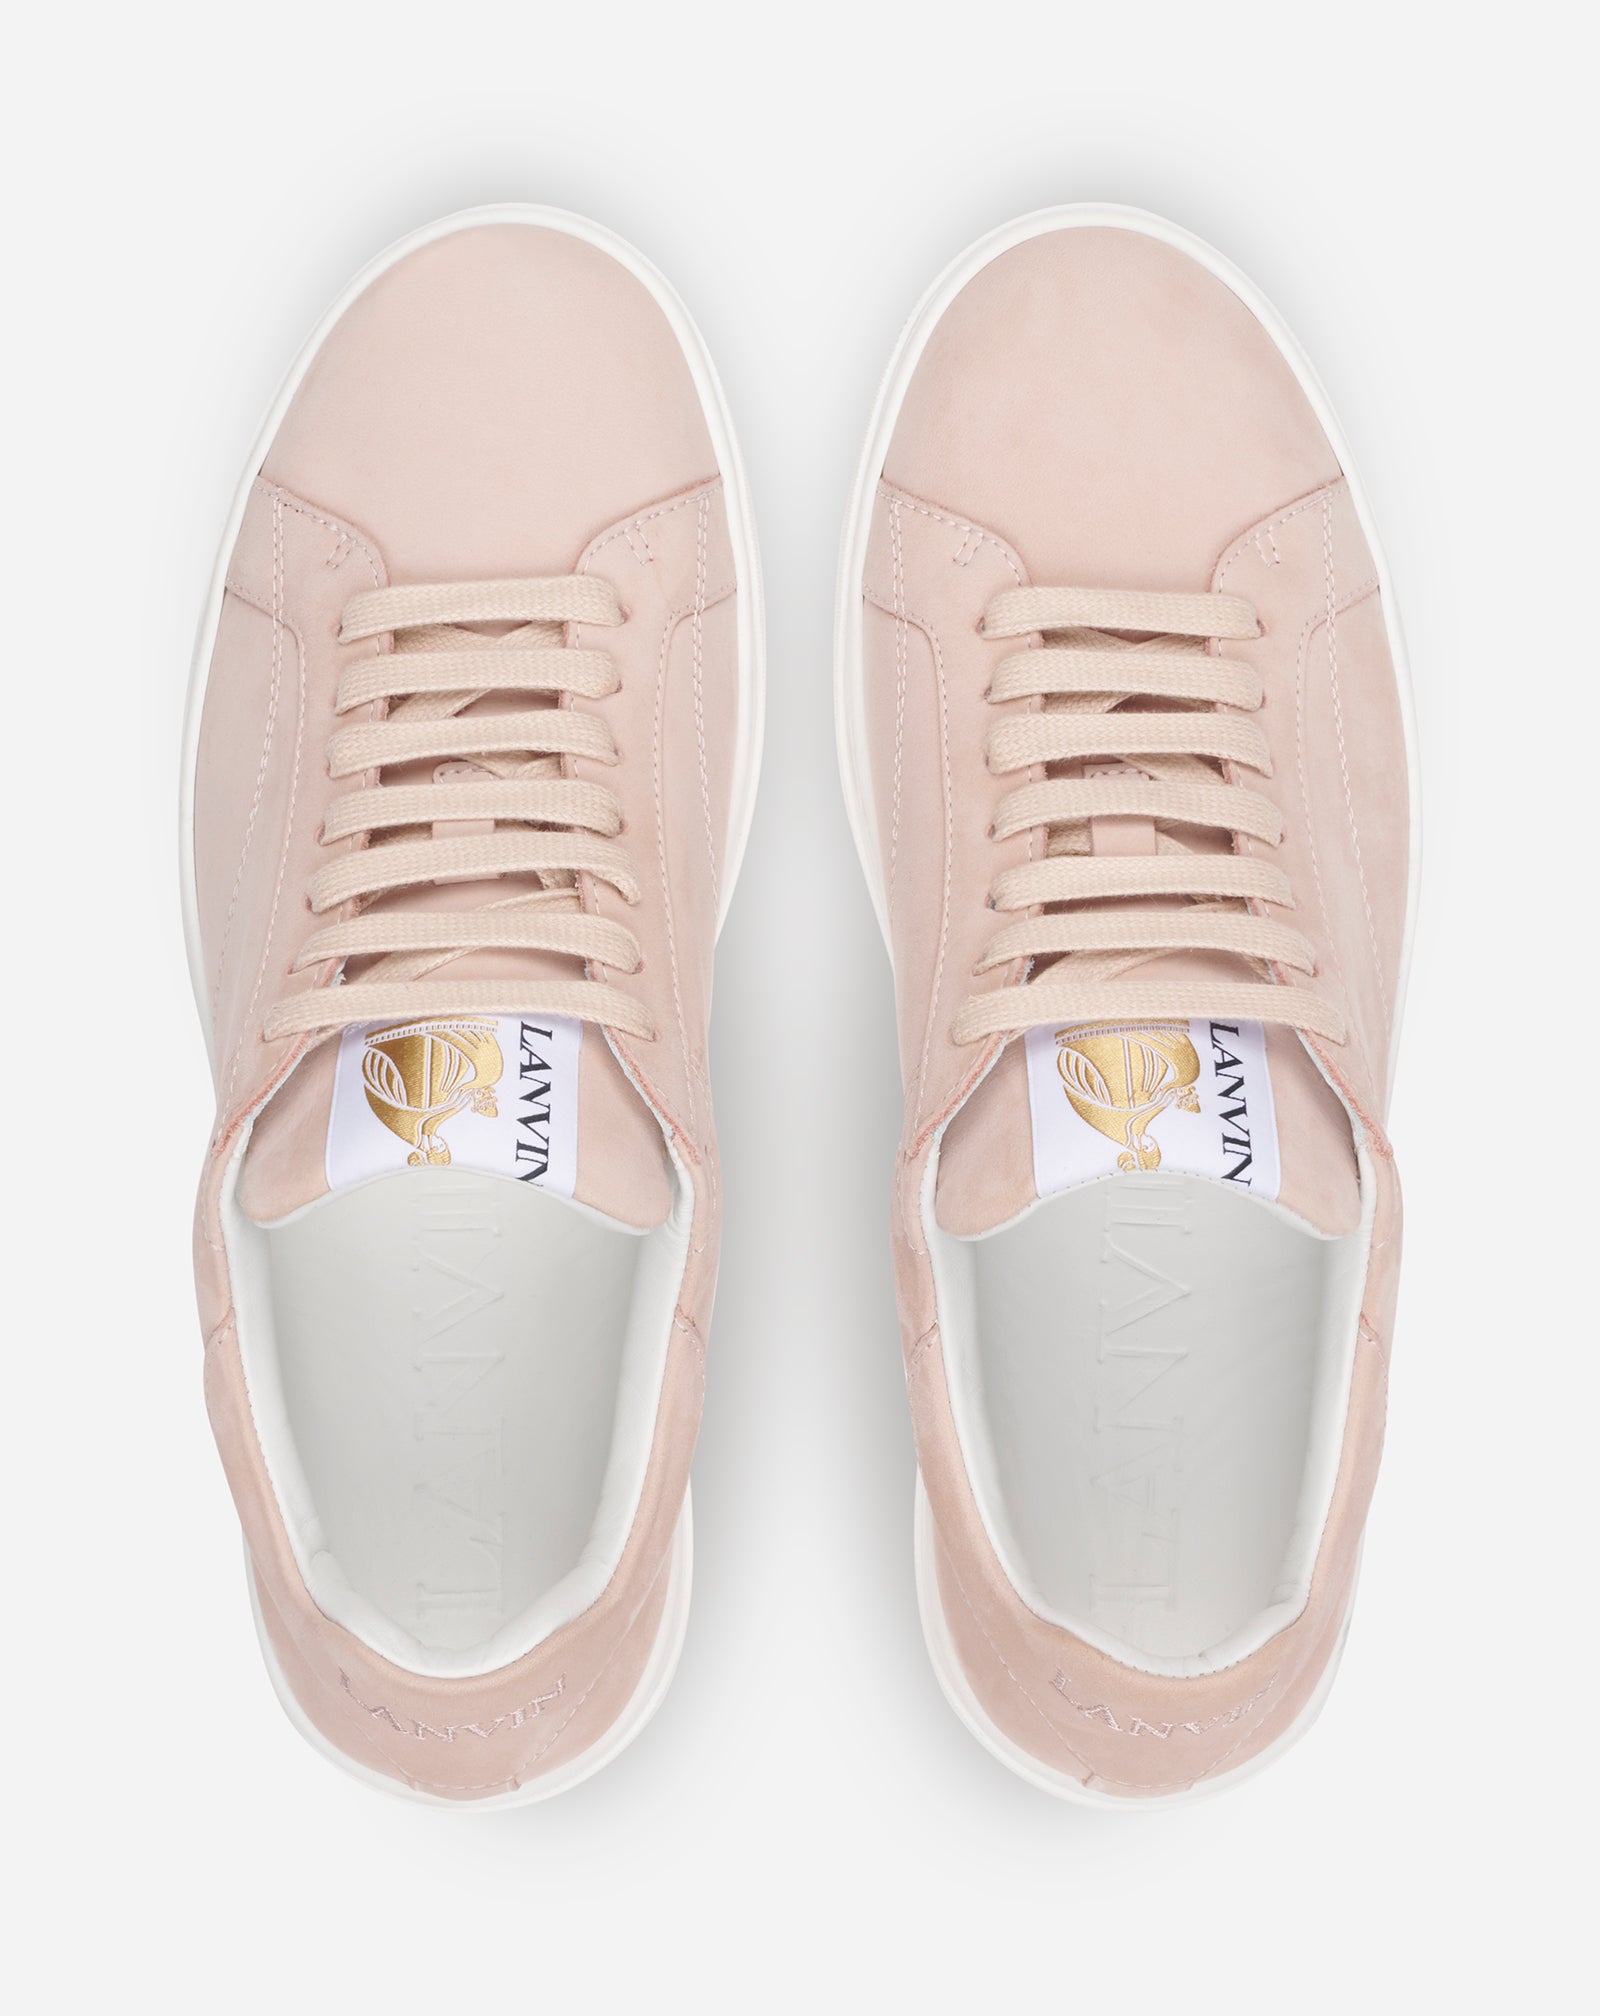 SUEDE DDB0 SNEAKERS PINK BLOSSOM | Lanvin – LANVIN